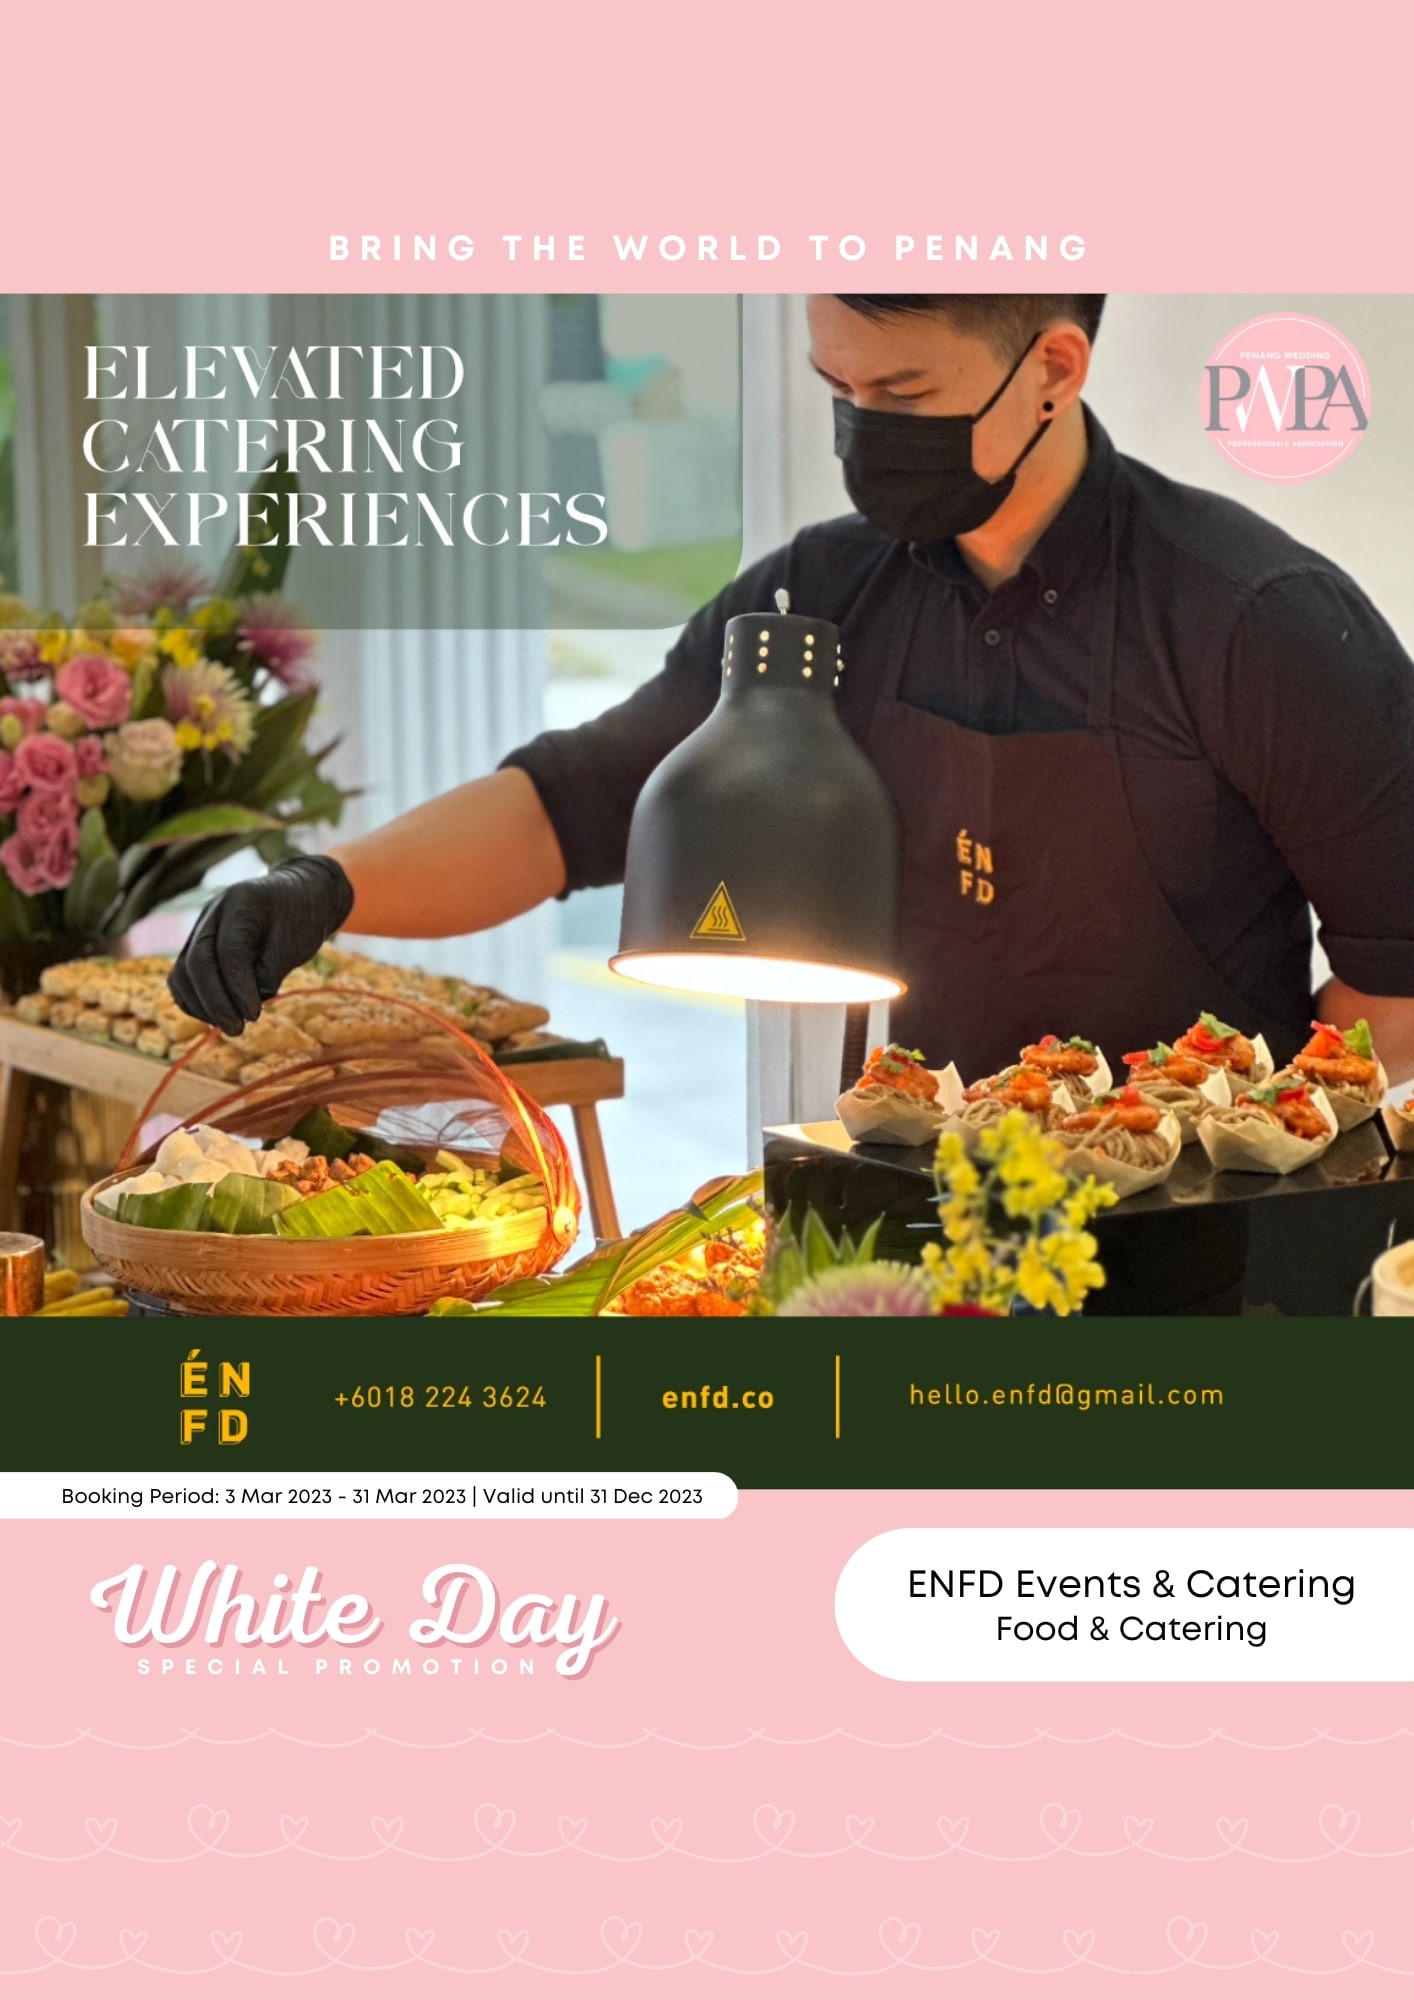 ENFD Events & Catering